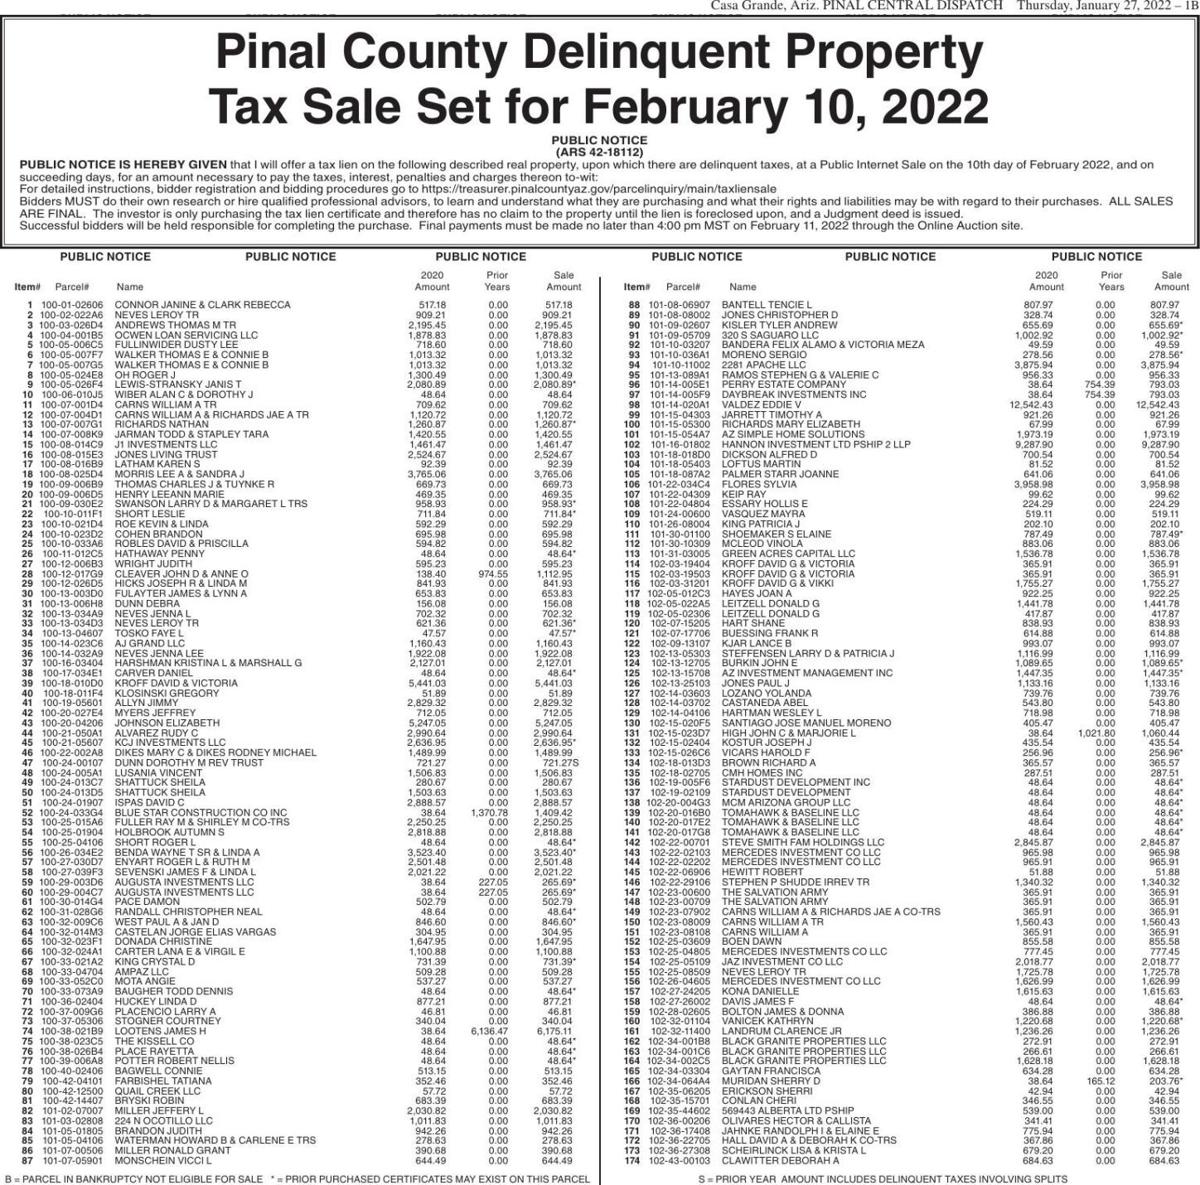 Pinal County Delinquent Tax Sale 2022